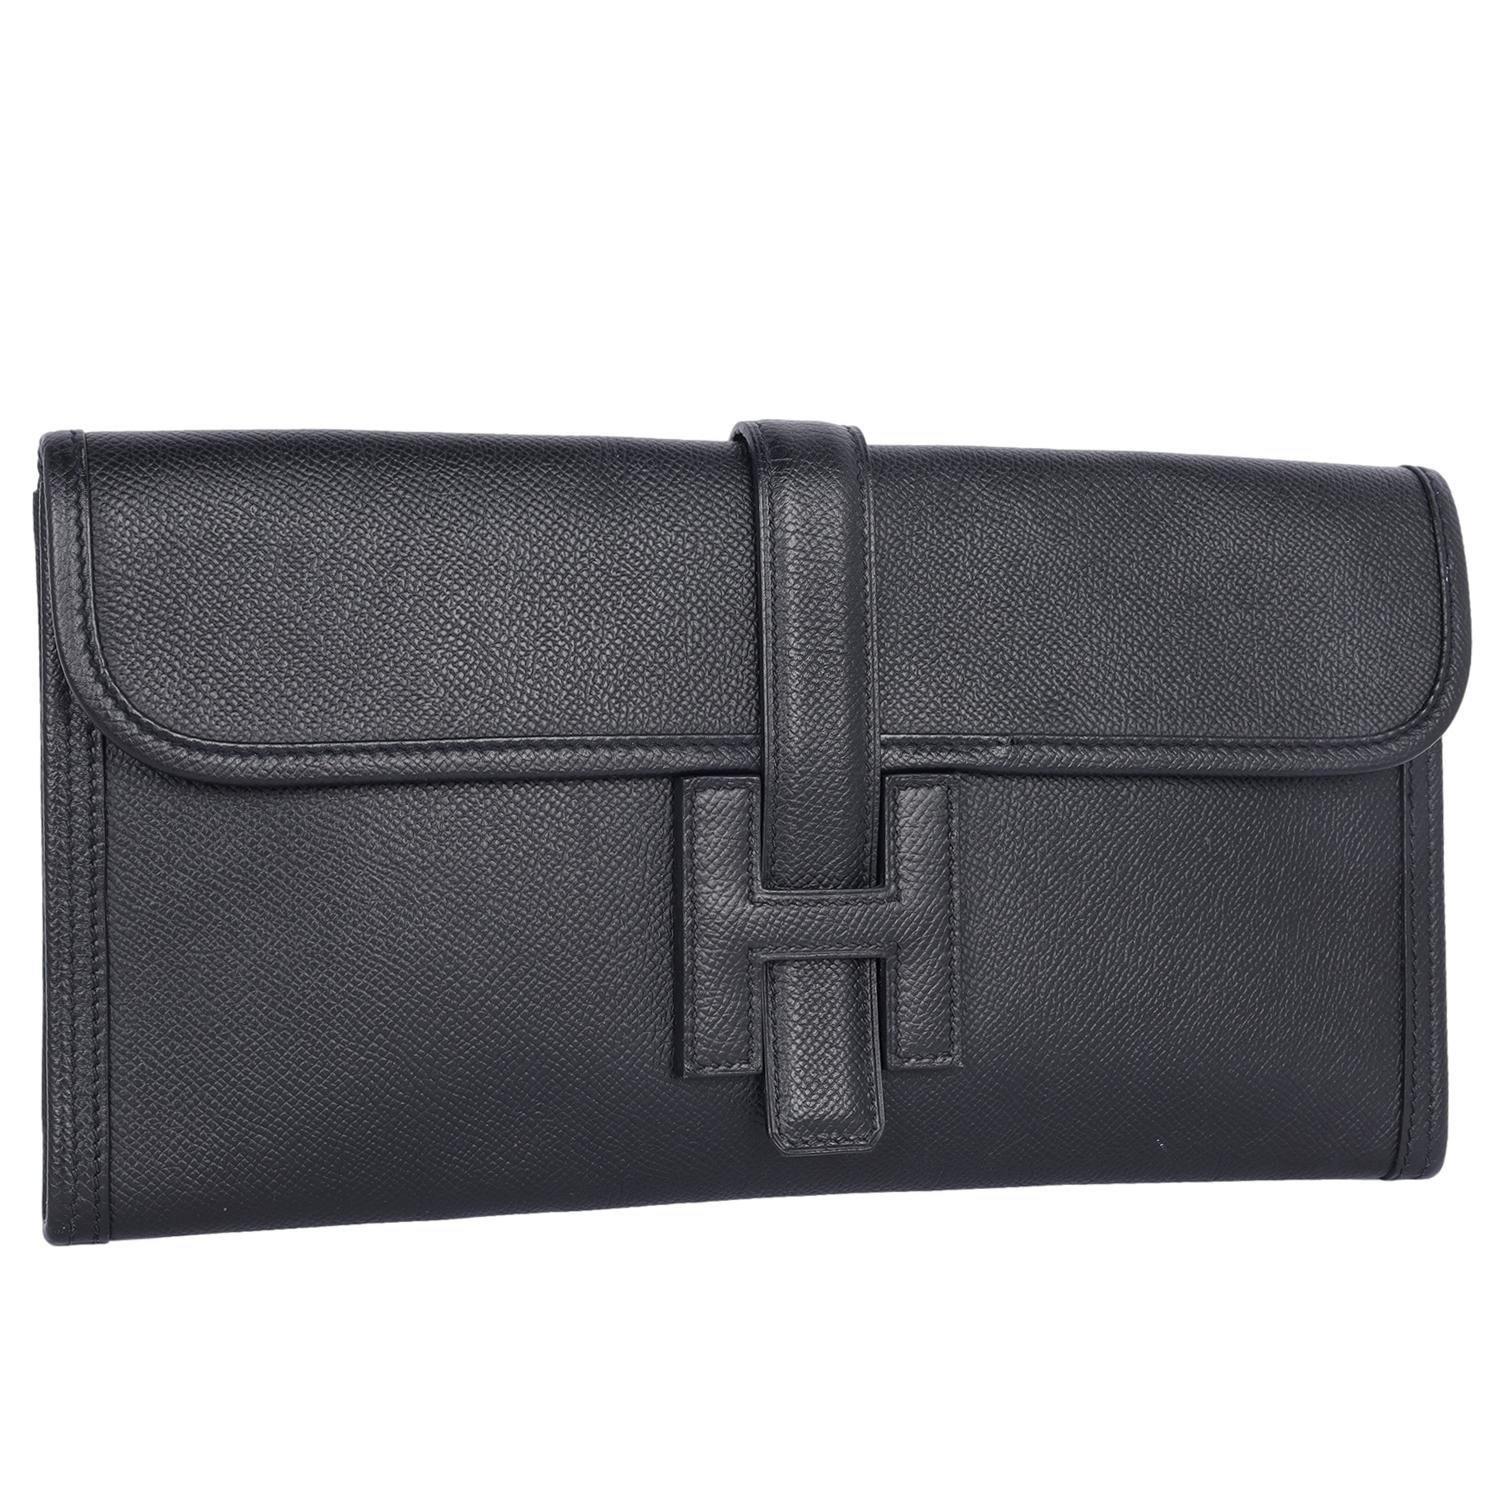 Authentic, pre-loved Hermes Swift Jige Elan 29 Clutch in black.

The clutch bag features swift calfskin leather in black. The bag has a front flap closure with a strap that tucks under the leather Hermes 